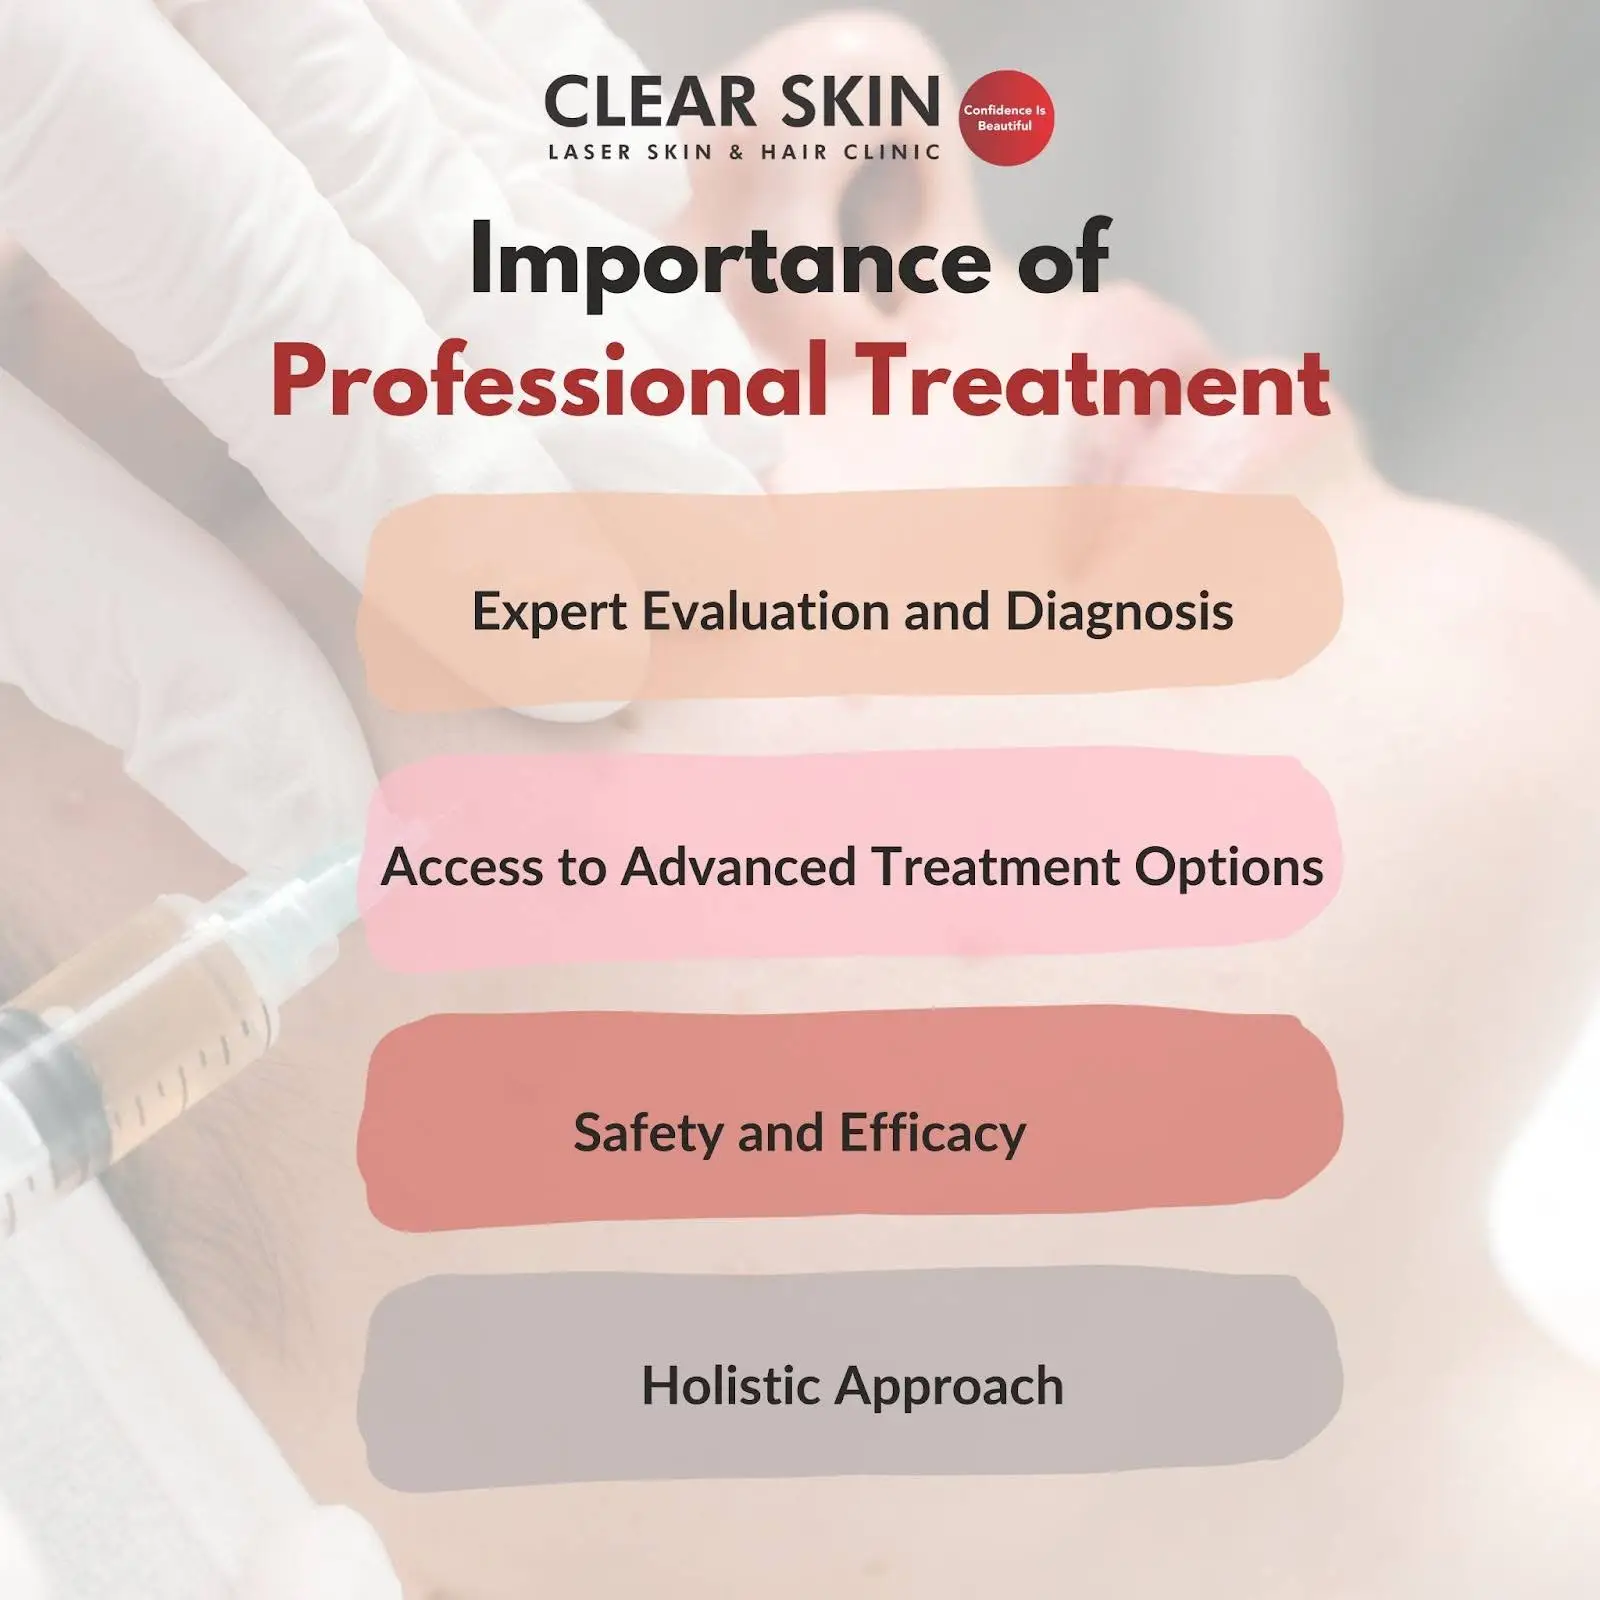 Importance of Professional Treatment